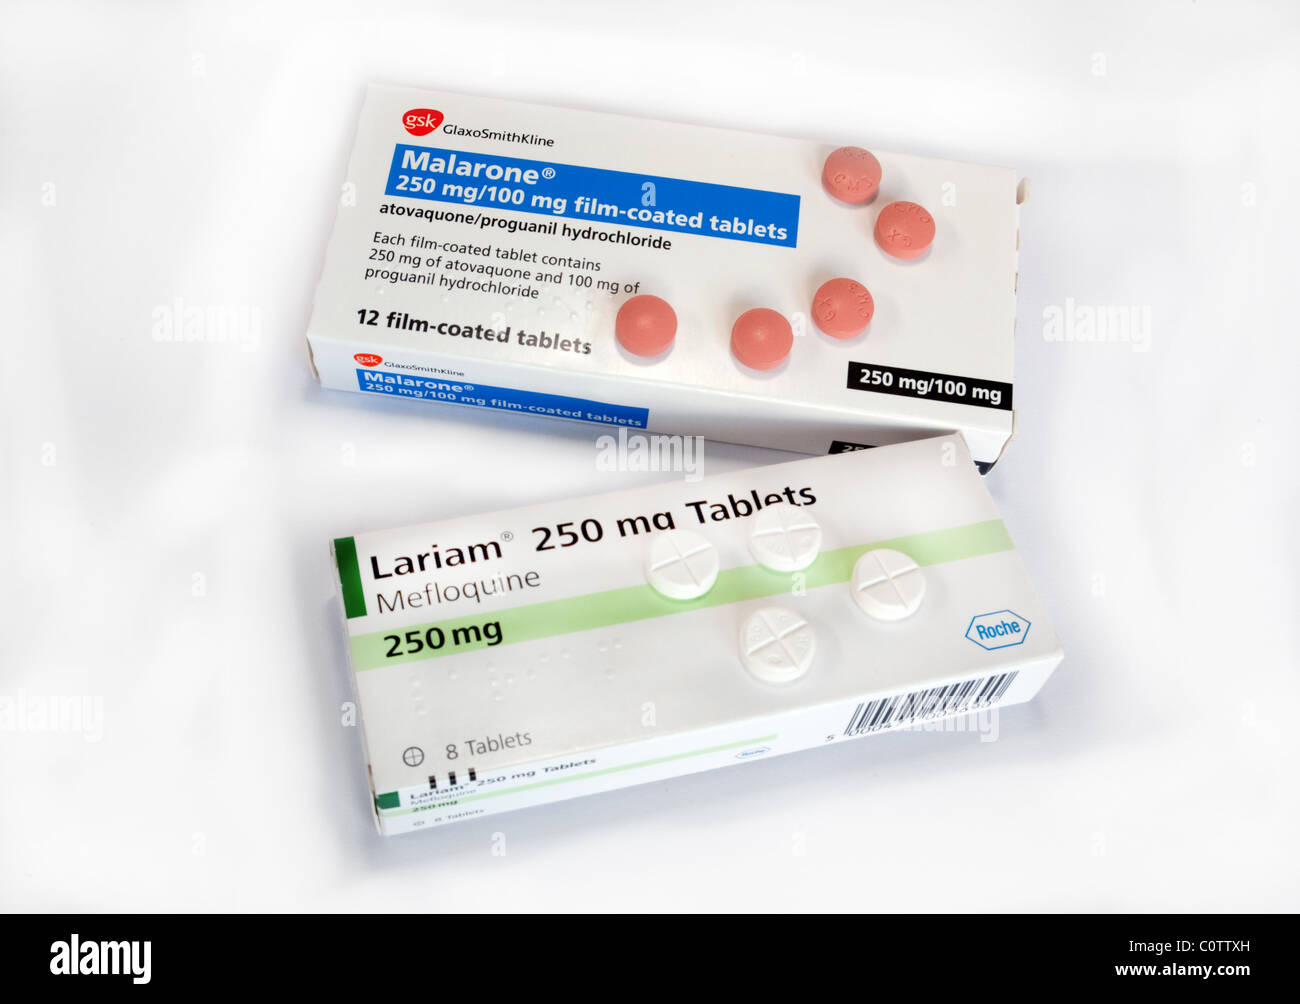 Malaria Tablets High Resolution Stock Photography and Images - Alamy